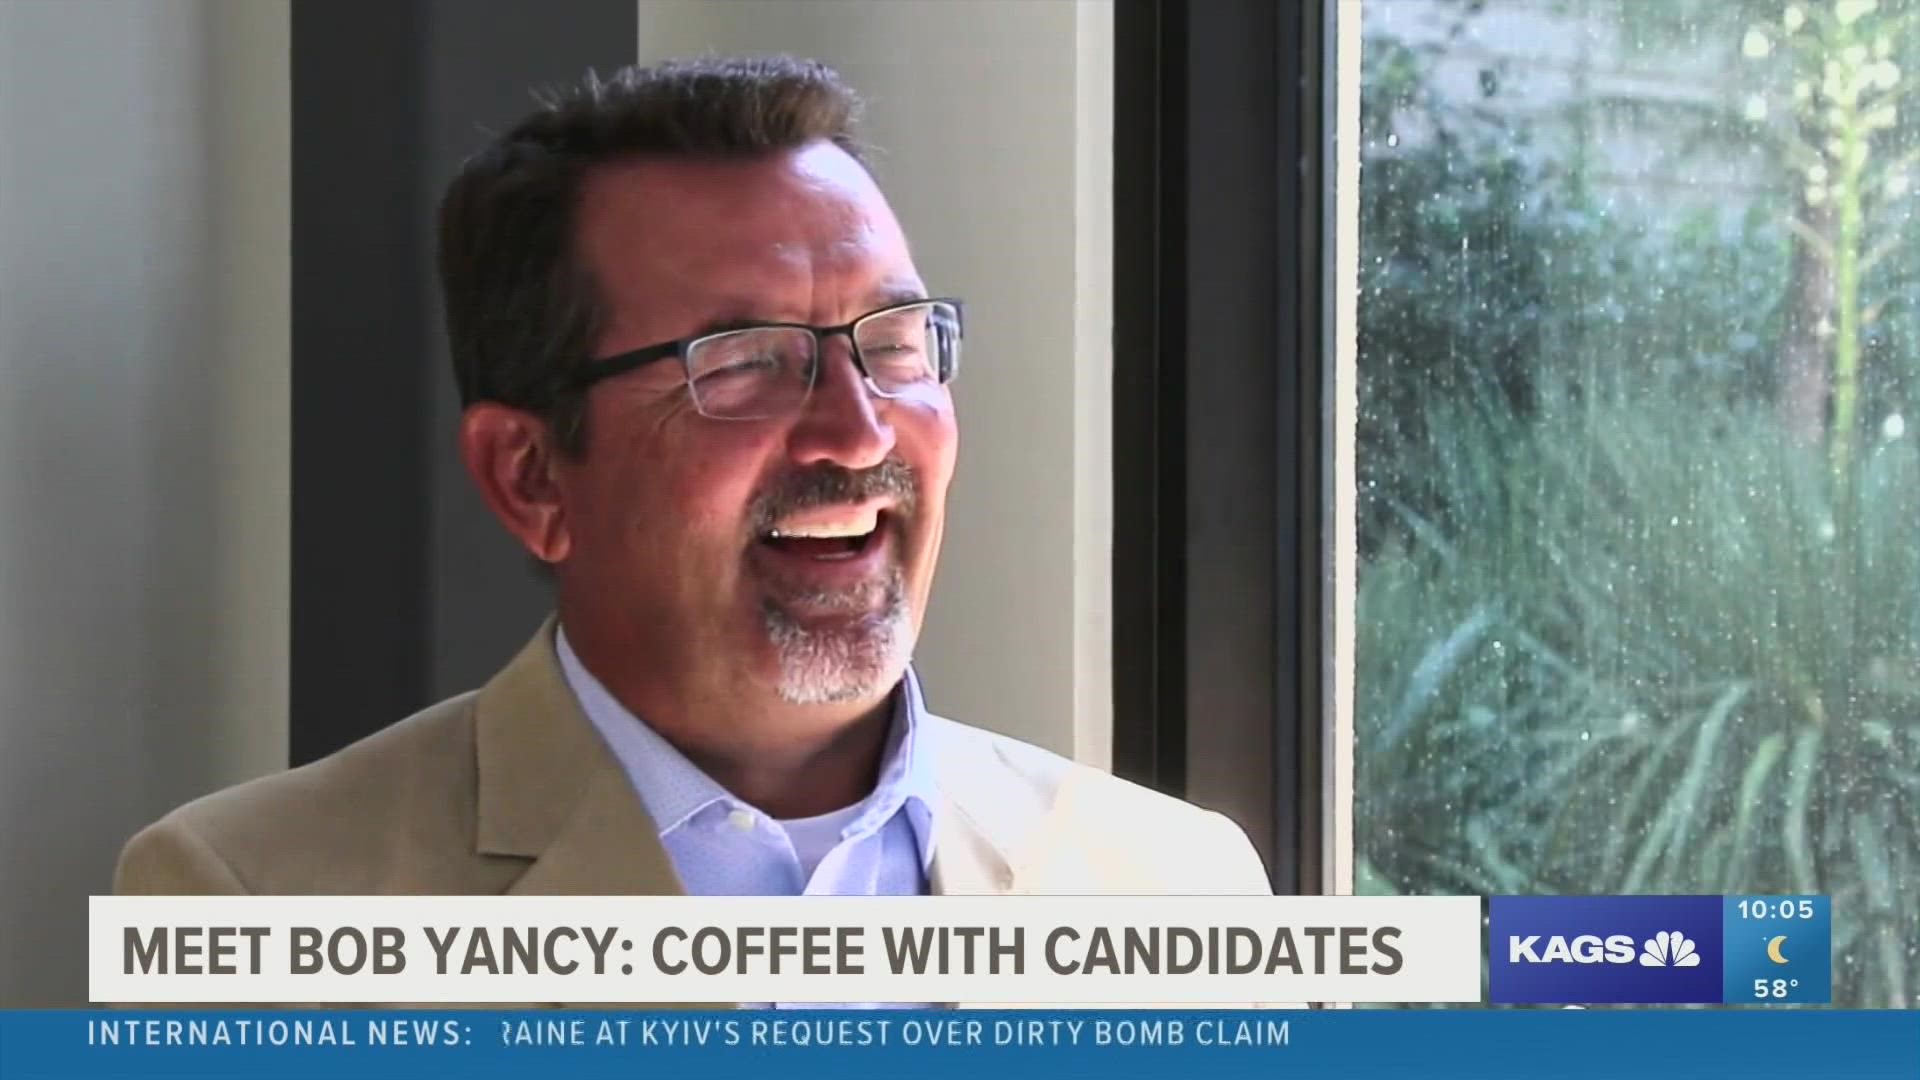 Bob Yancy, who previously served as a Public Information Officer for the City of College Station, has decided to run for Place 5 on the city council.